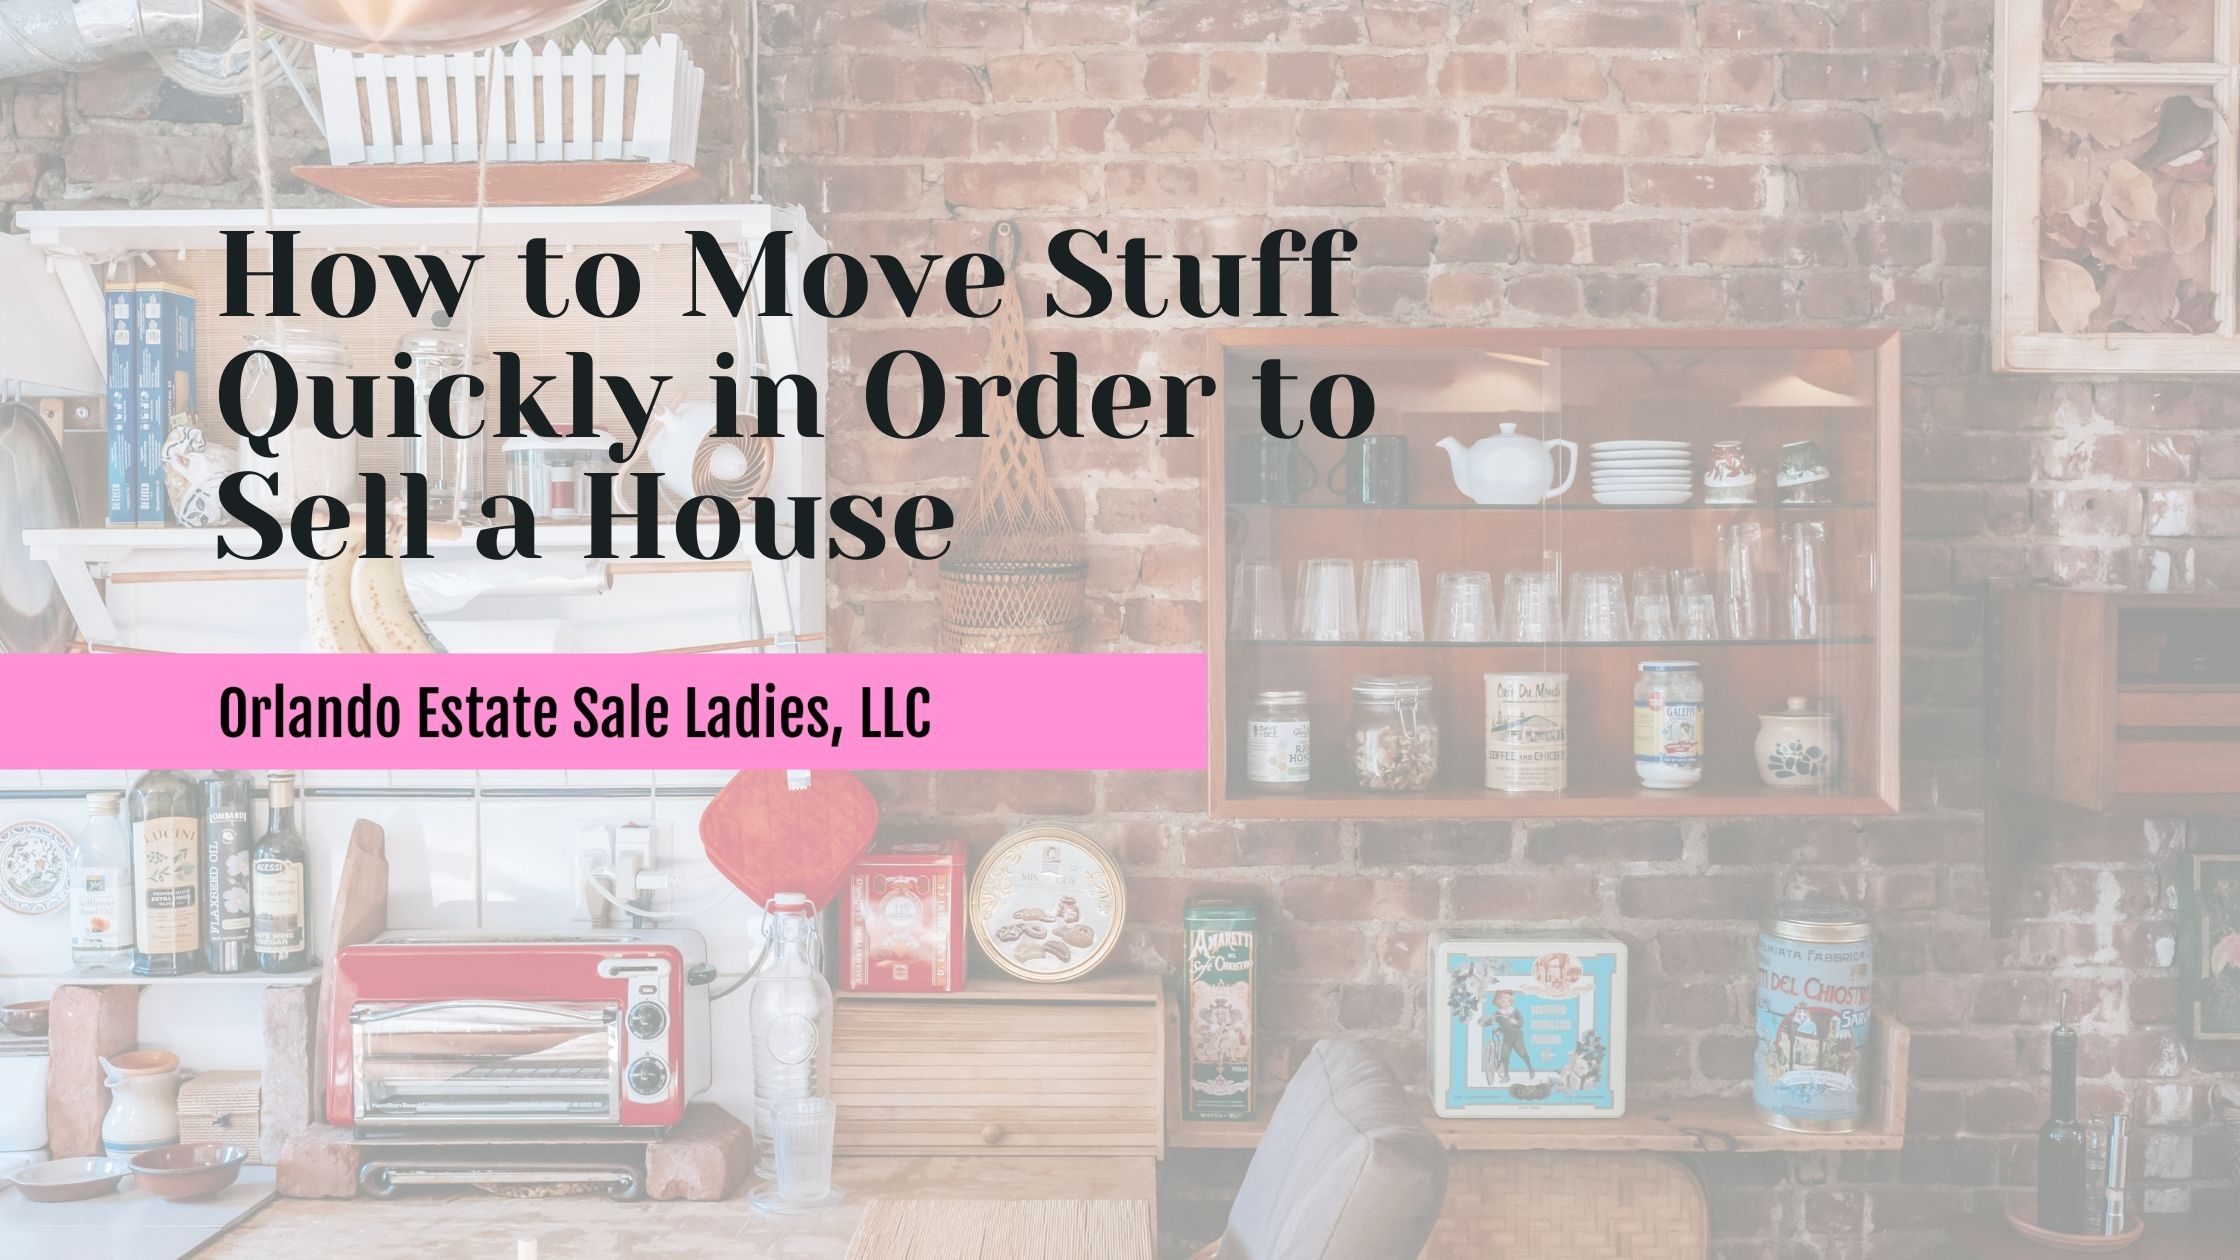 How to Move Stuff Quickly in Order to Sell a House